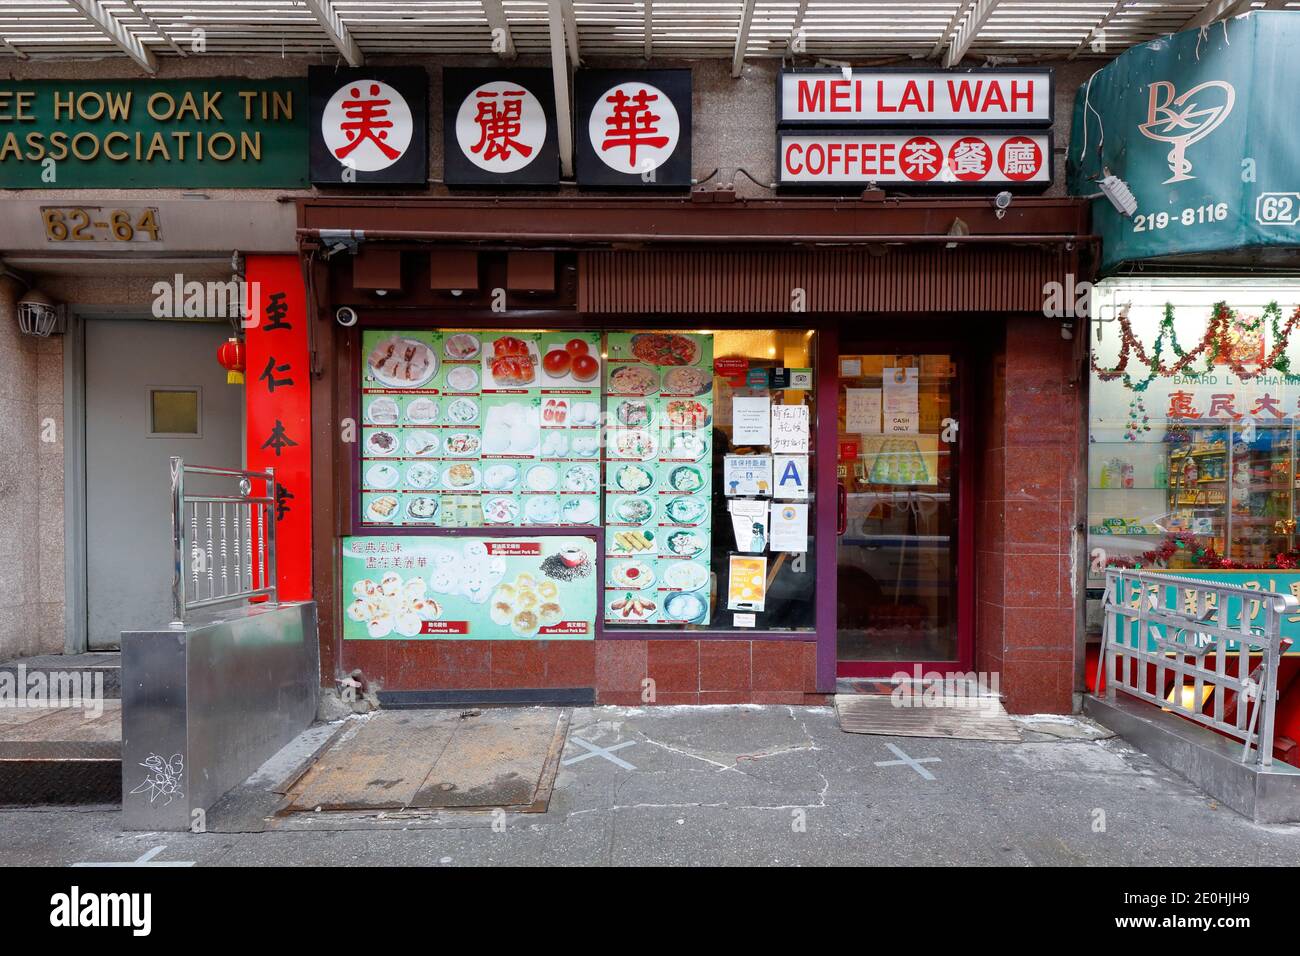 Mei Lai Wah 美麗華, 64 Bayard St, New York, NYC storefront photo of a Chinese bakery and coffee shop in Manhattan Chinatown. Stock Photo